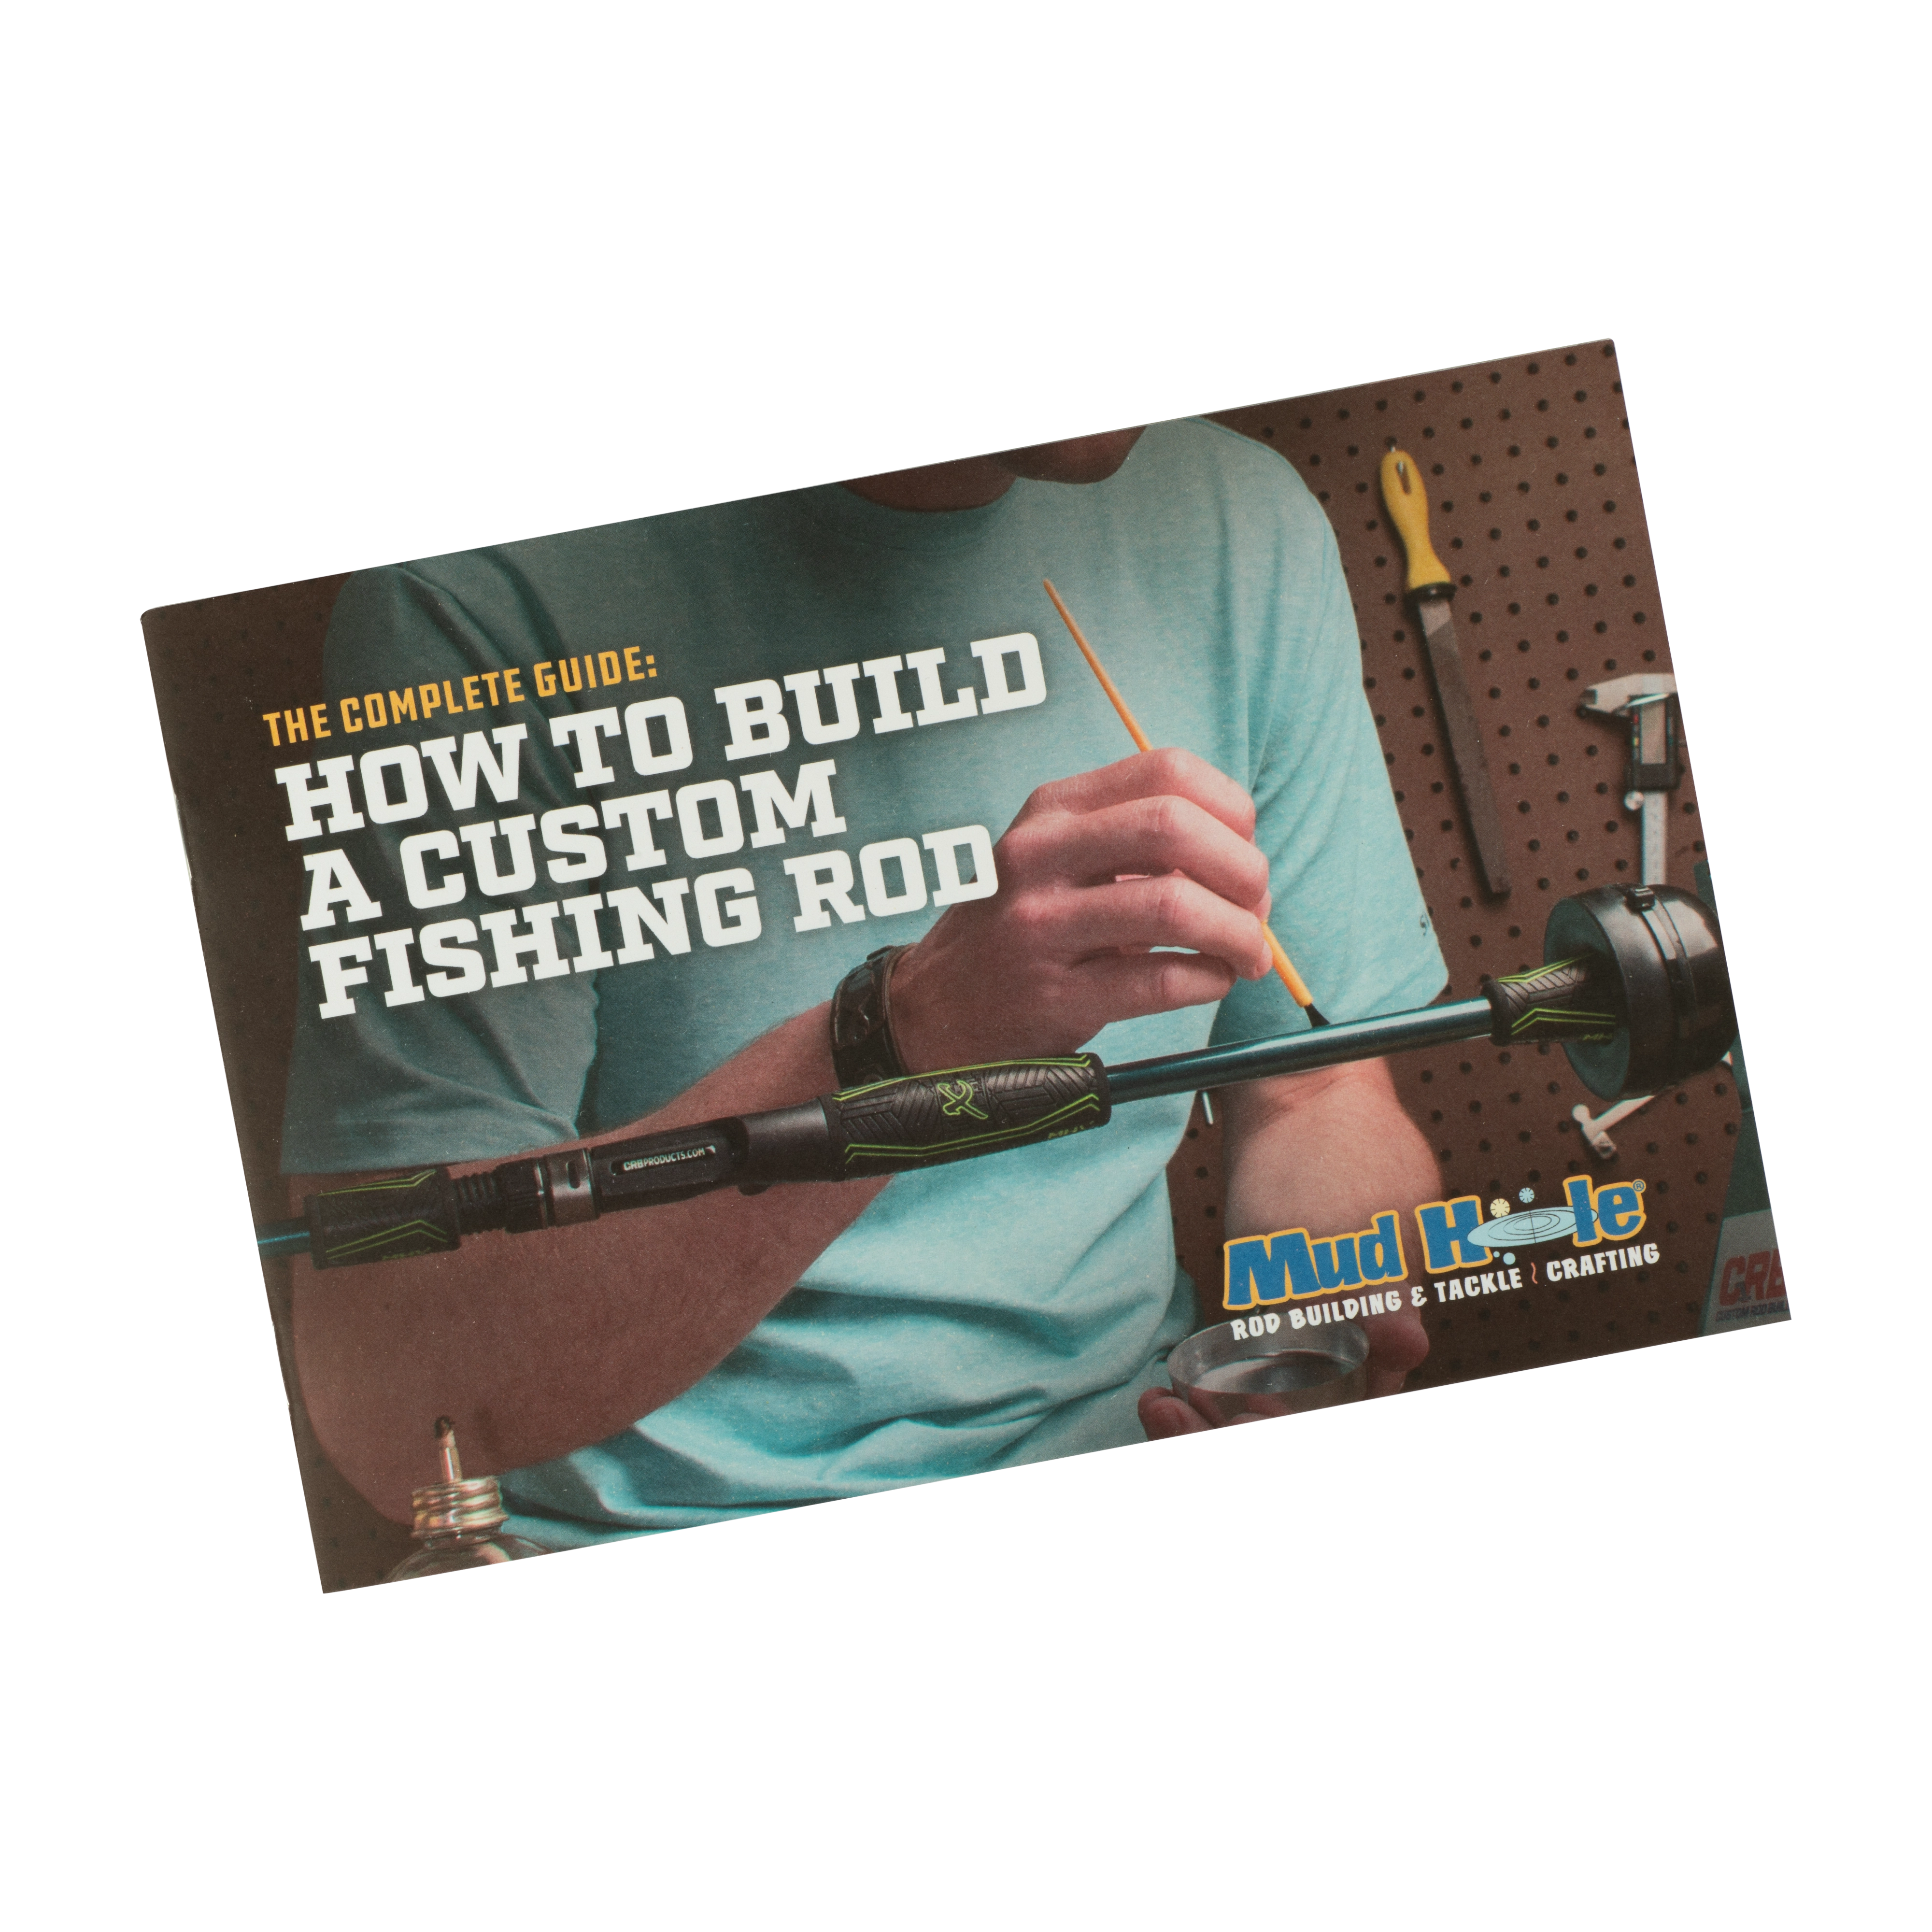 Rod Building 101: The Complete Guide How To Build a Custom Fishing Rod